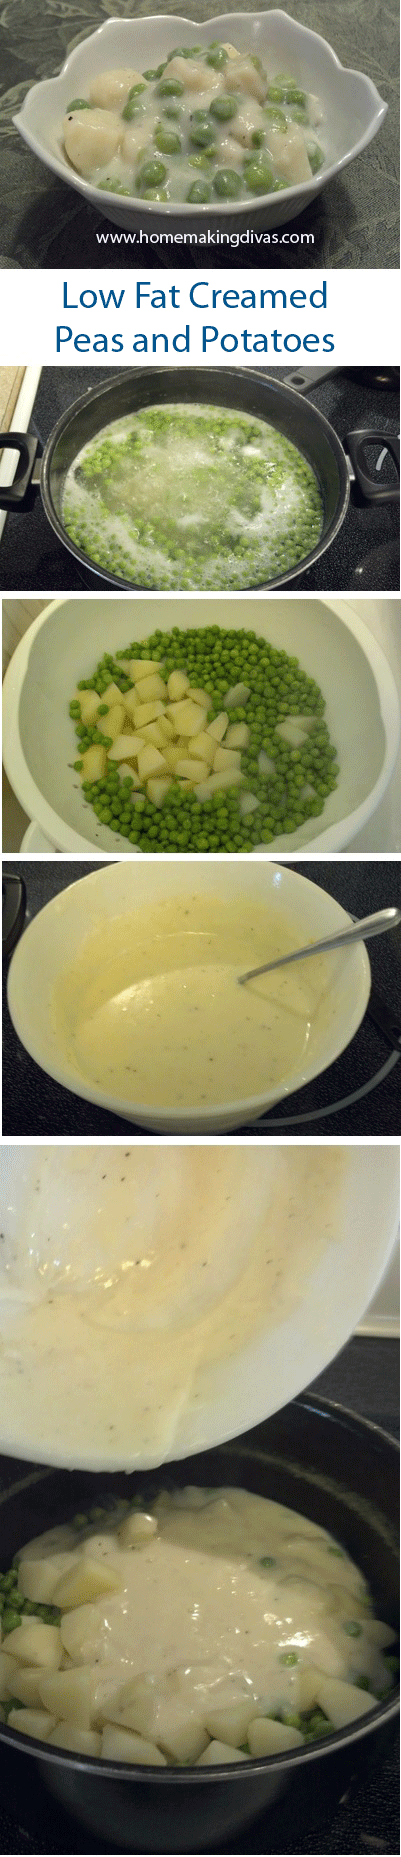 Low Fat Creamed Peas and Potatoes